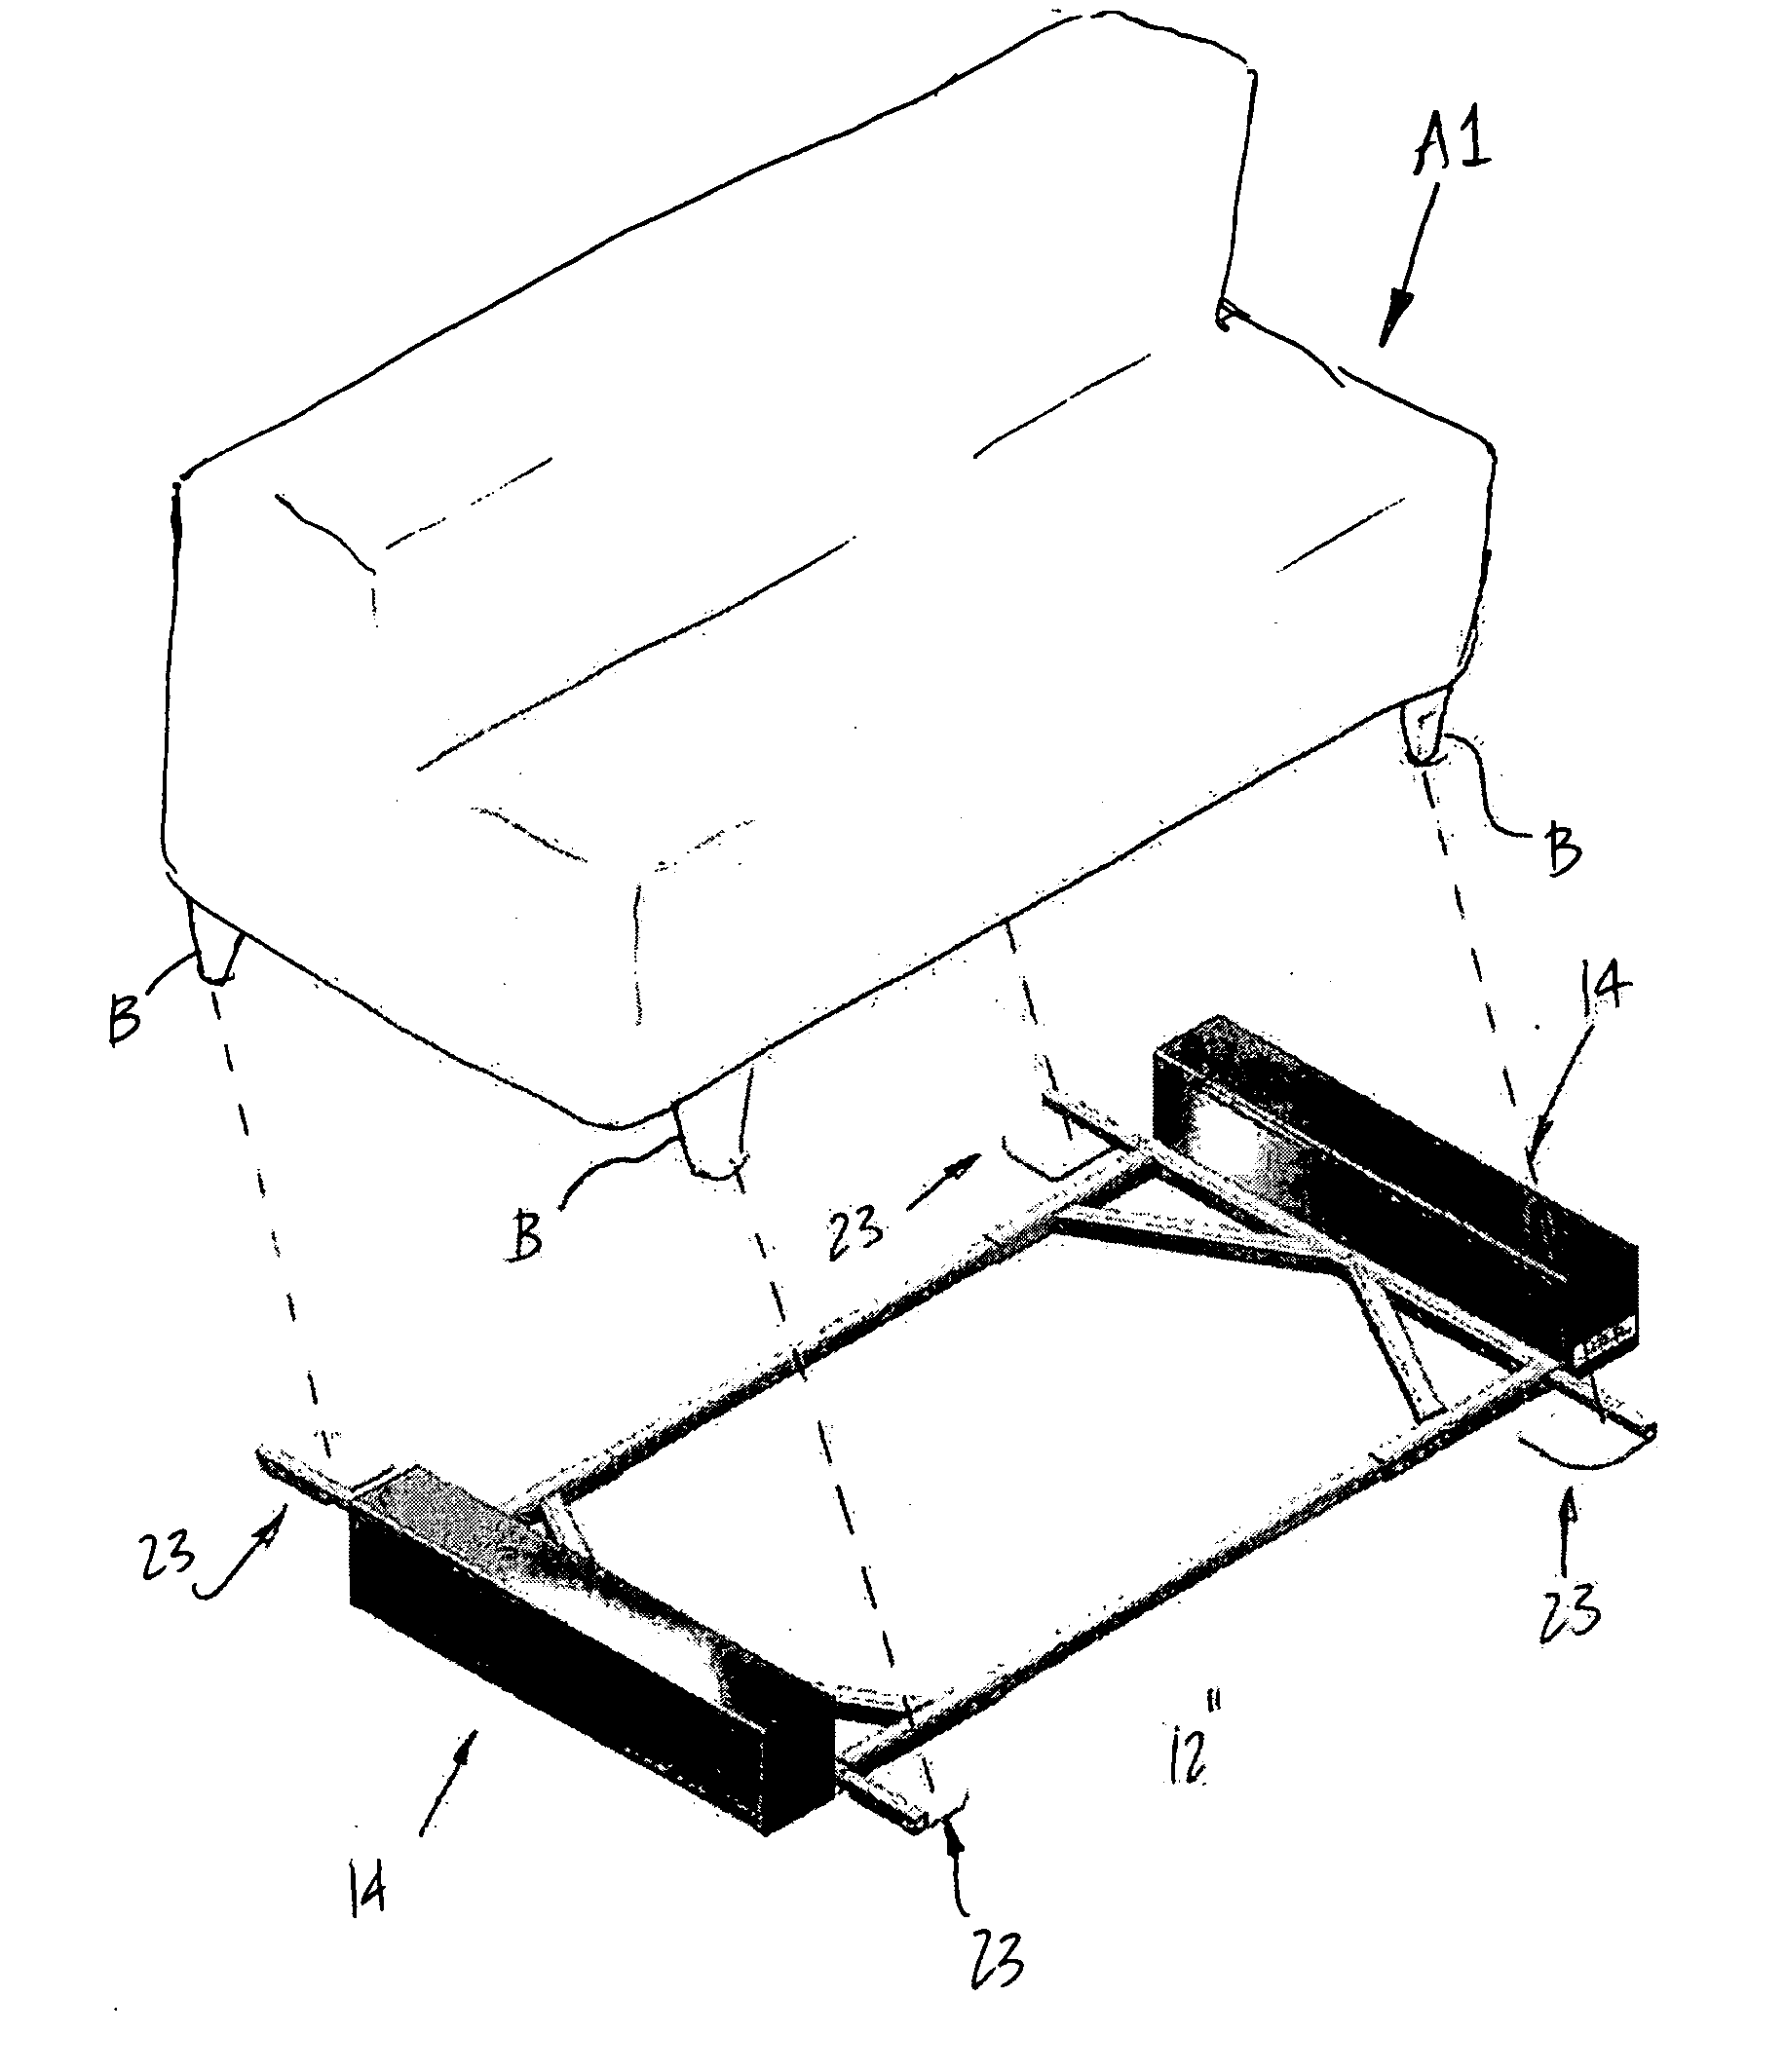 Actuated support platform for video system